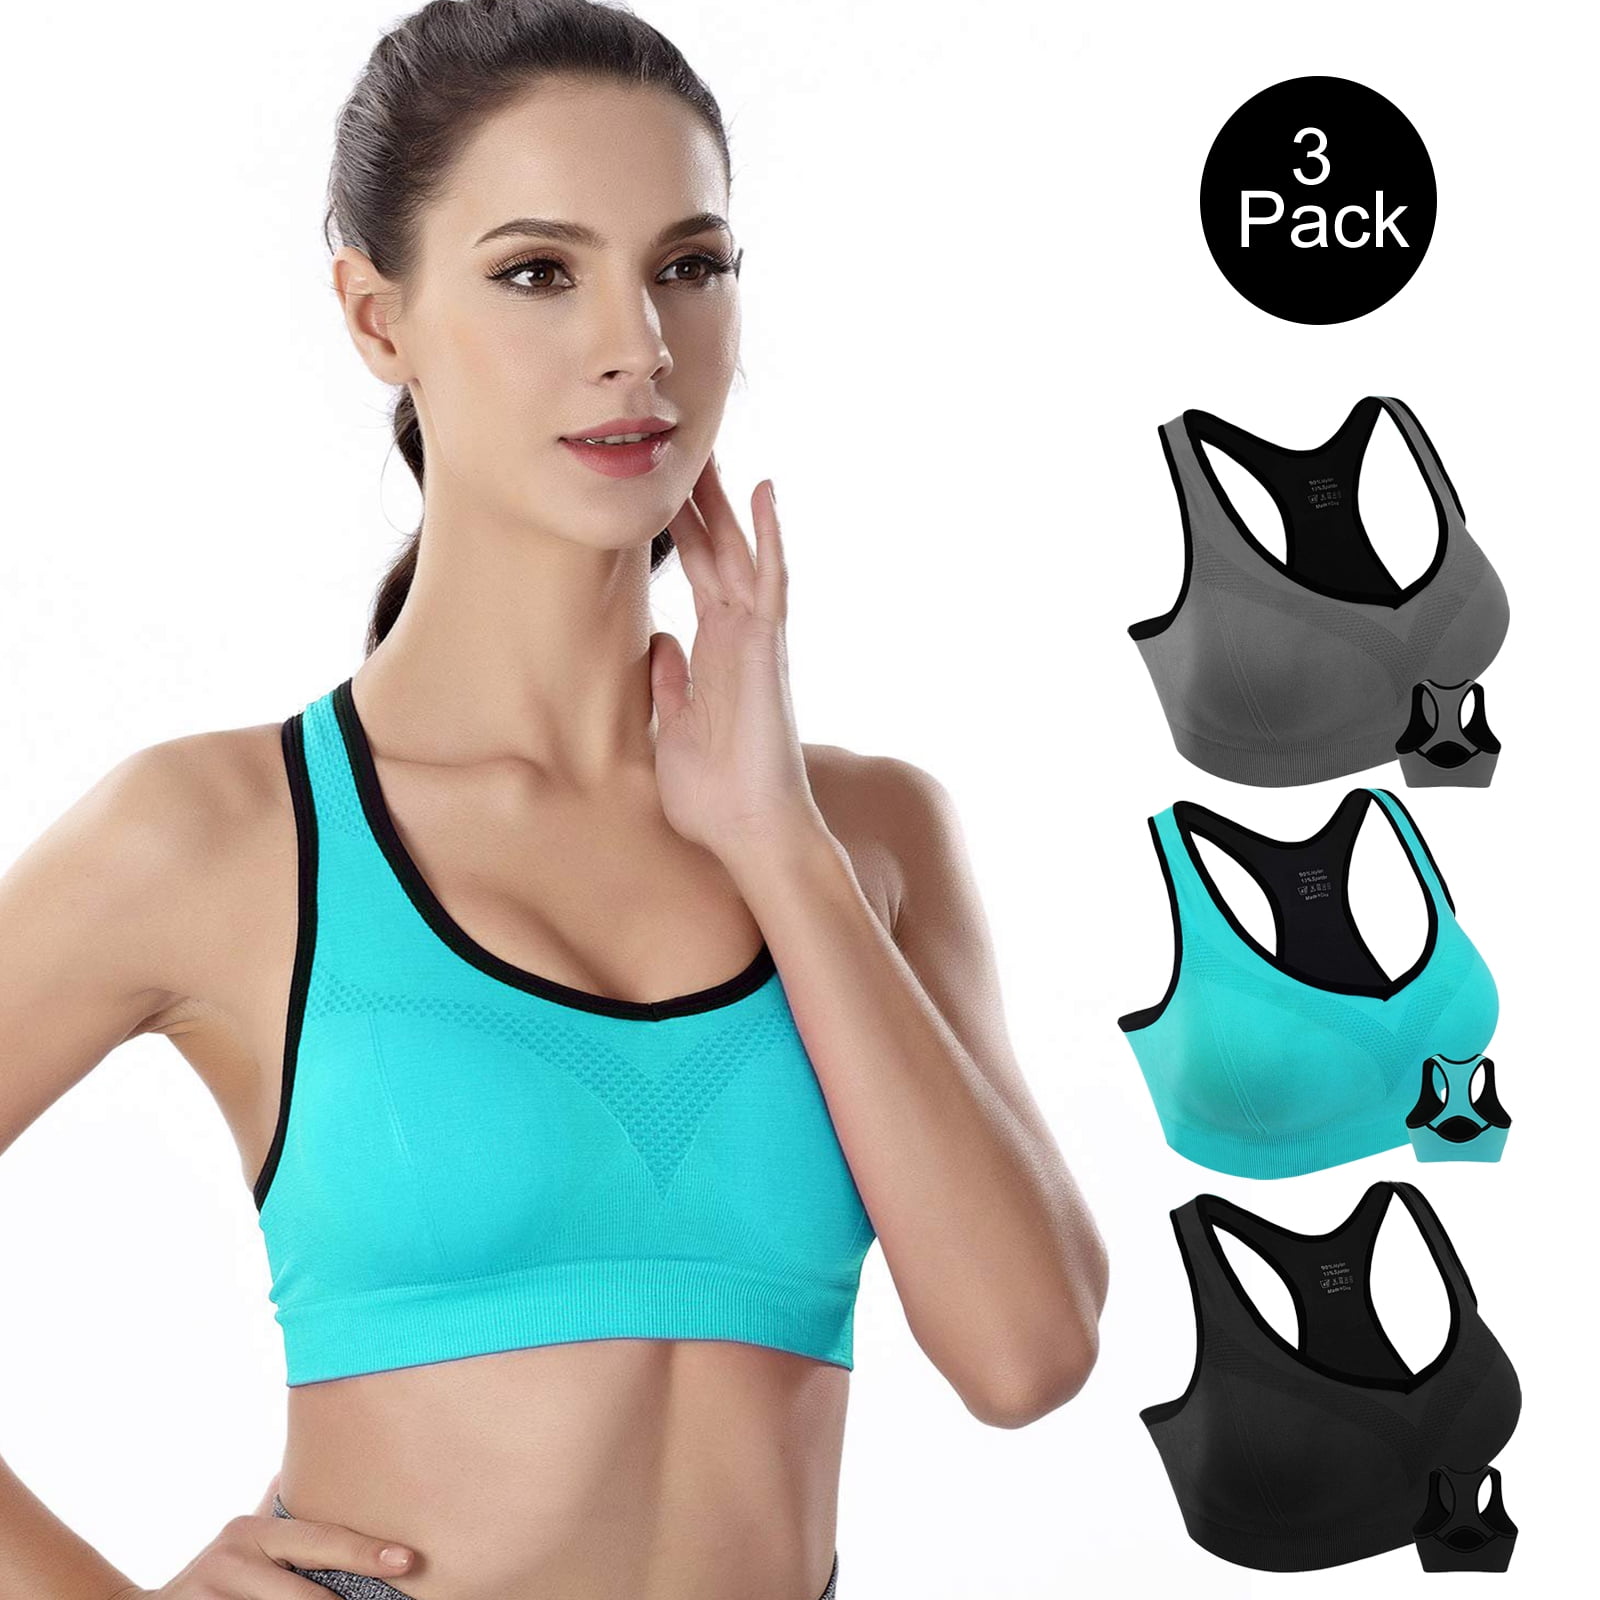 Xmarks Sports Bras for Women High Support - Breathable Sports Bras for Women,Gathers  for Fitness Running Yoga Quick Drying Sports Bra(4-Packs) 